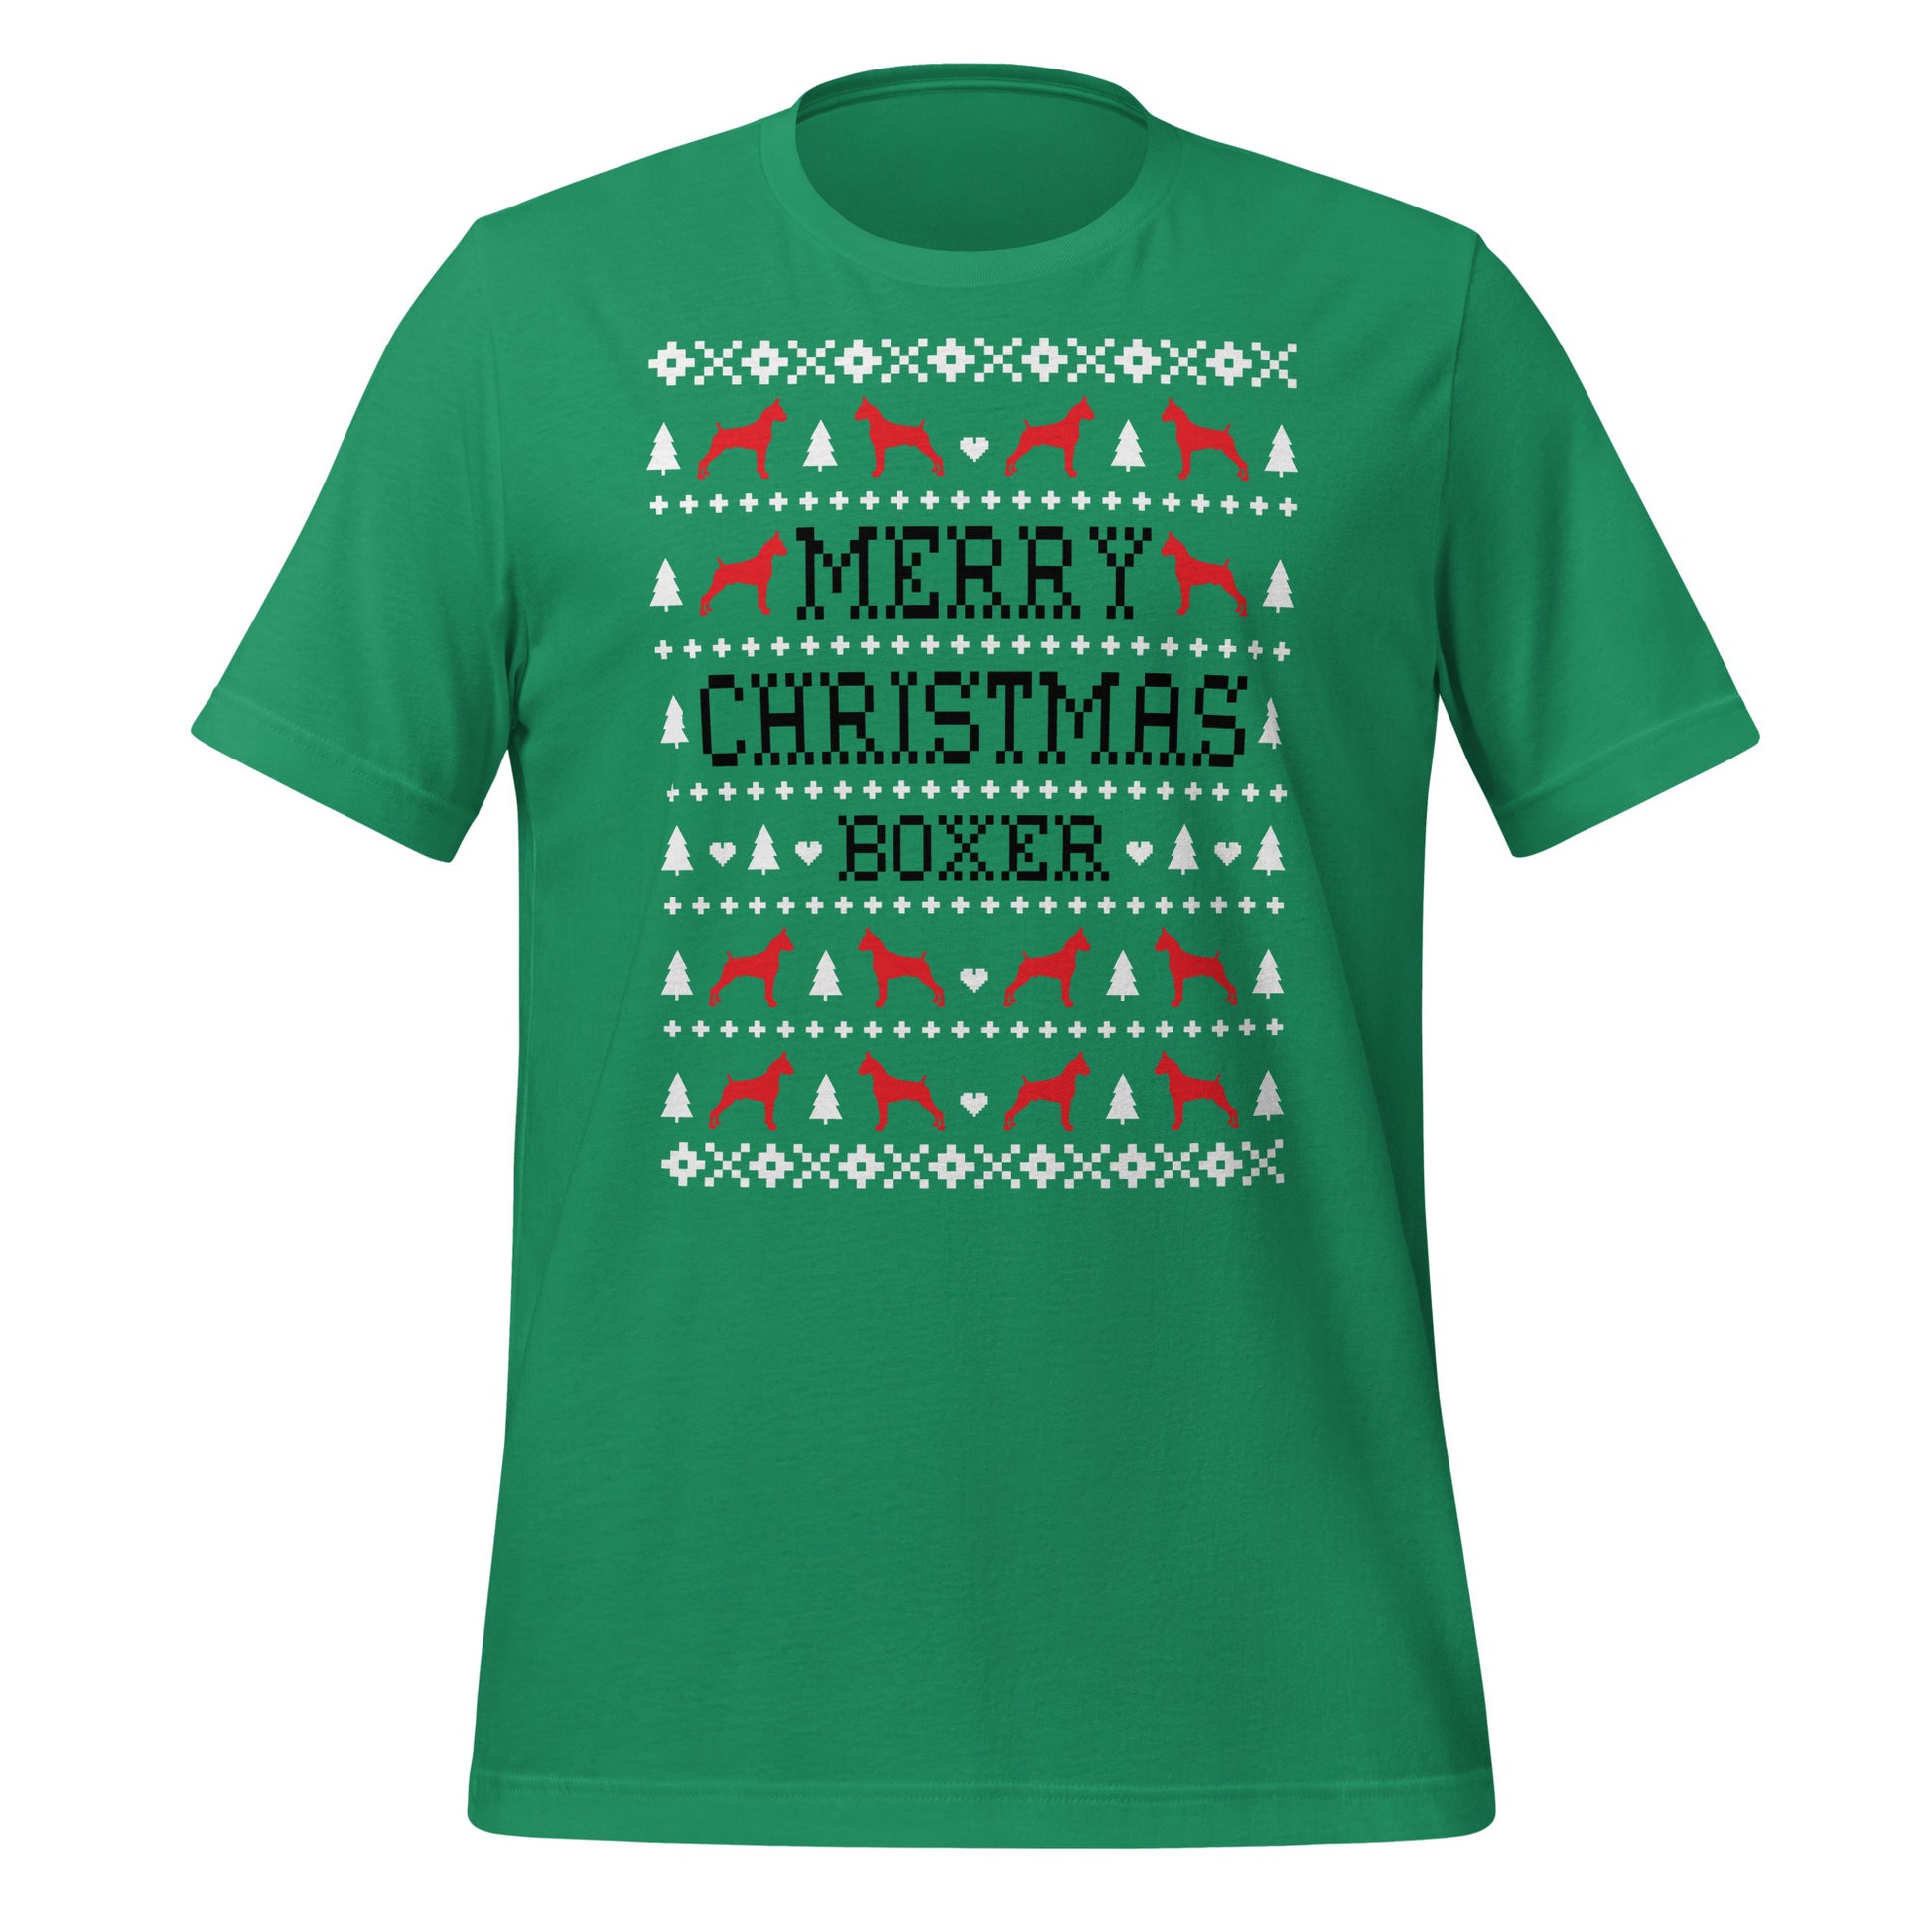 Boxer Dog Ugly Christmas t-shirt green by Dog Artistry.